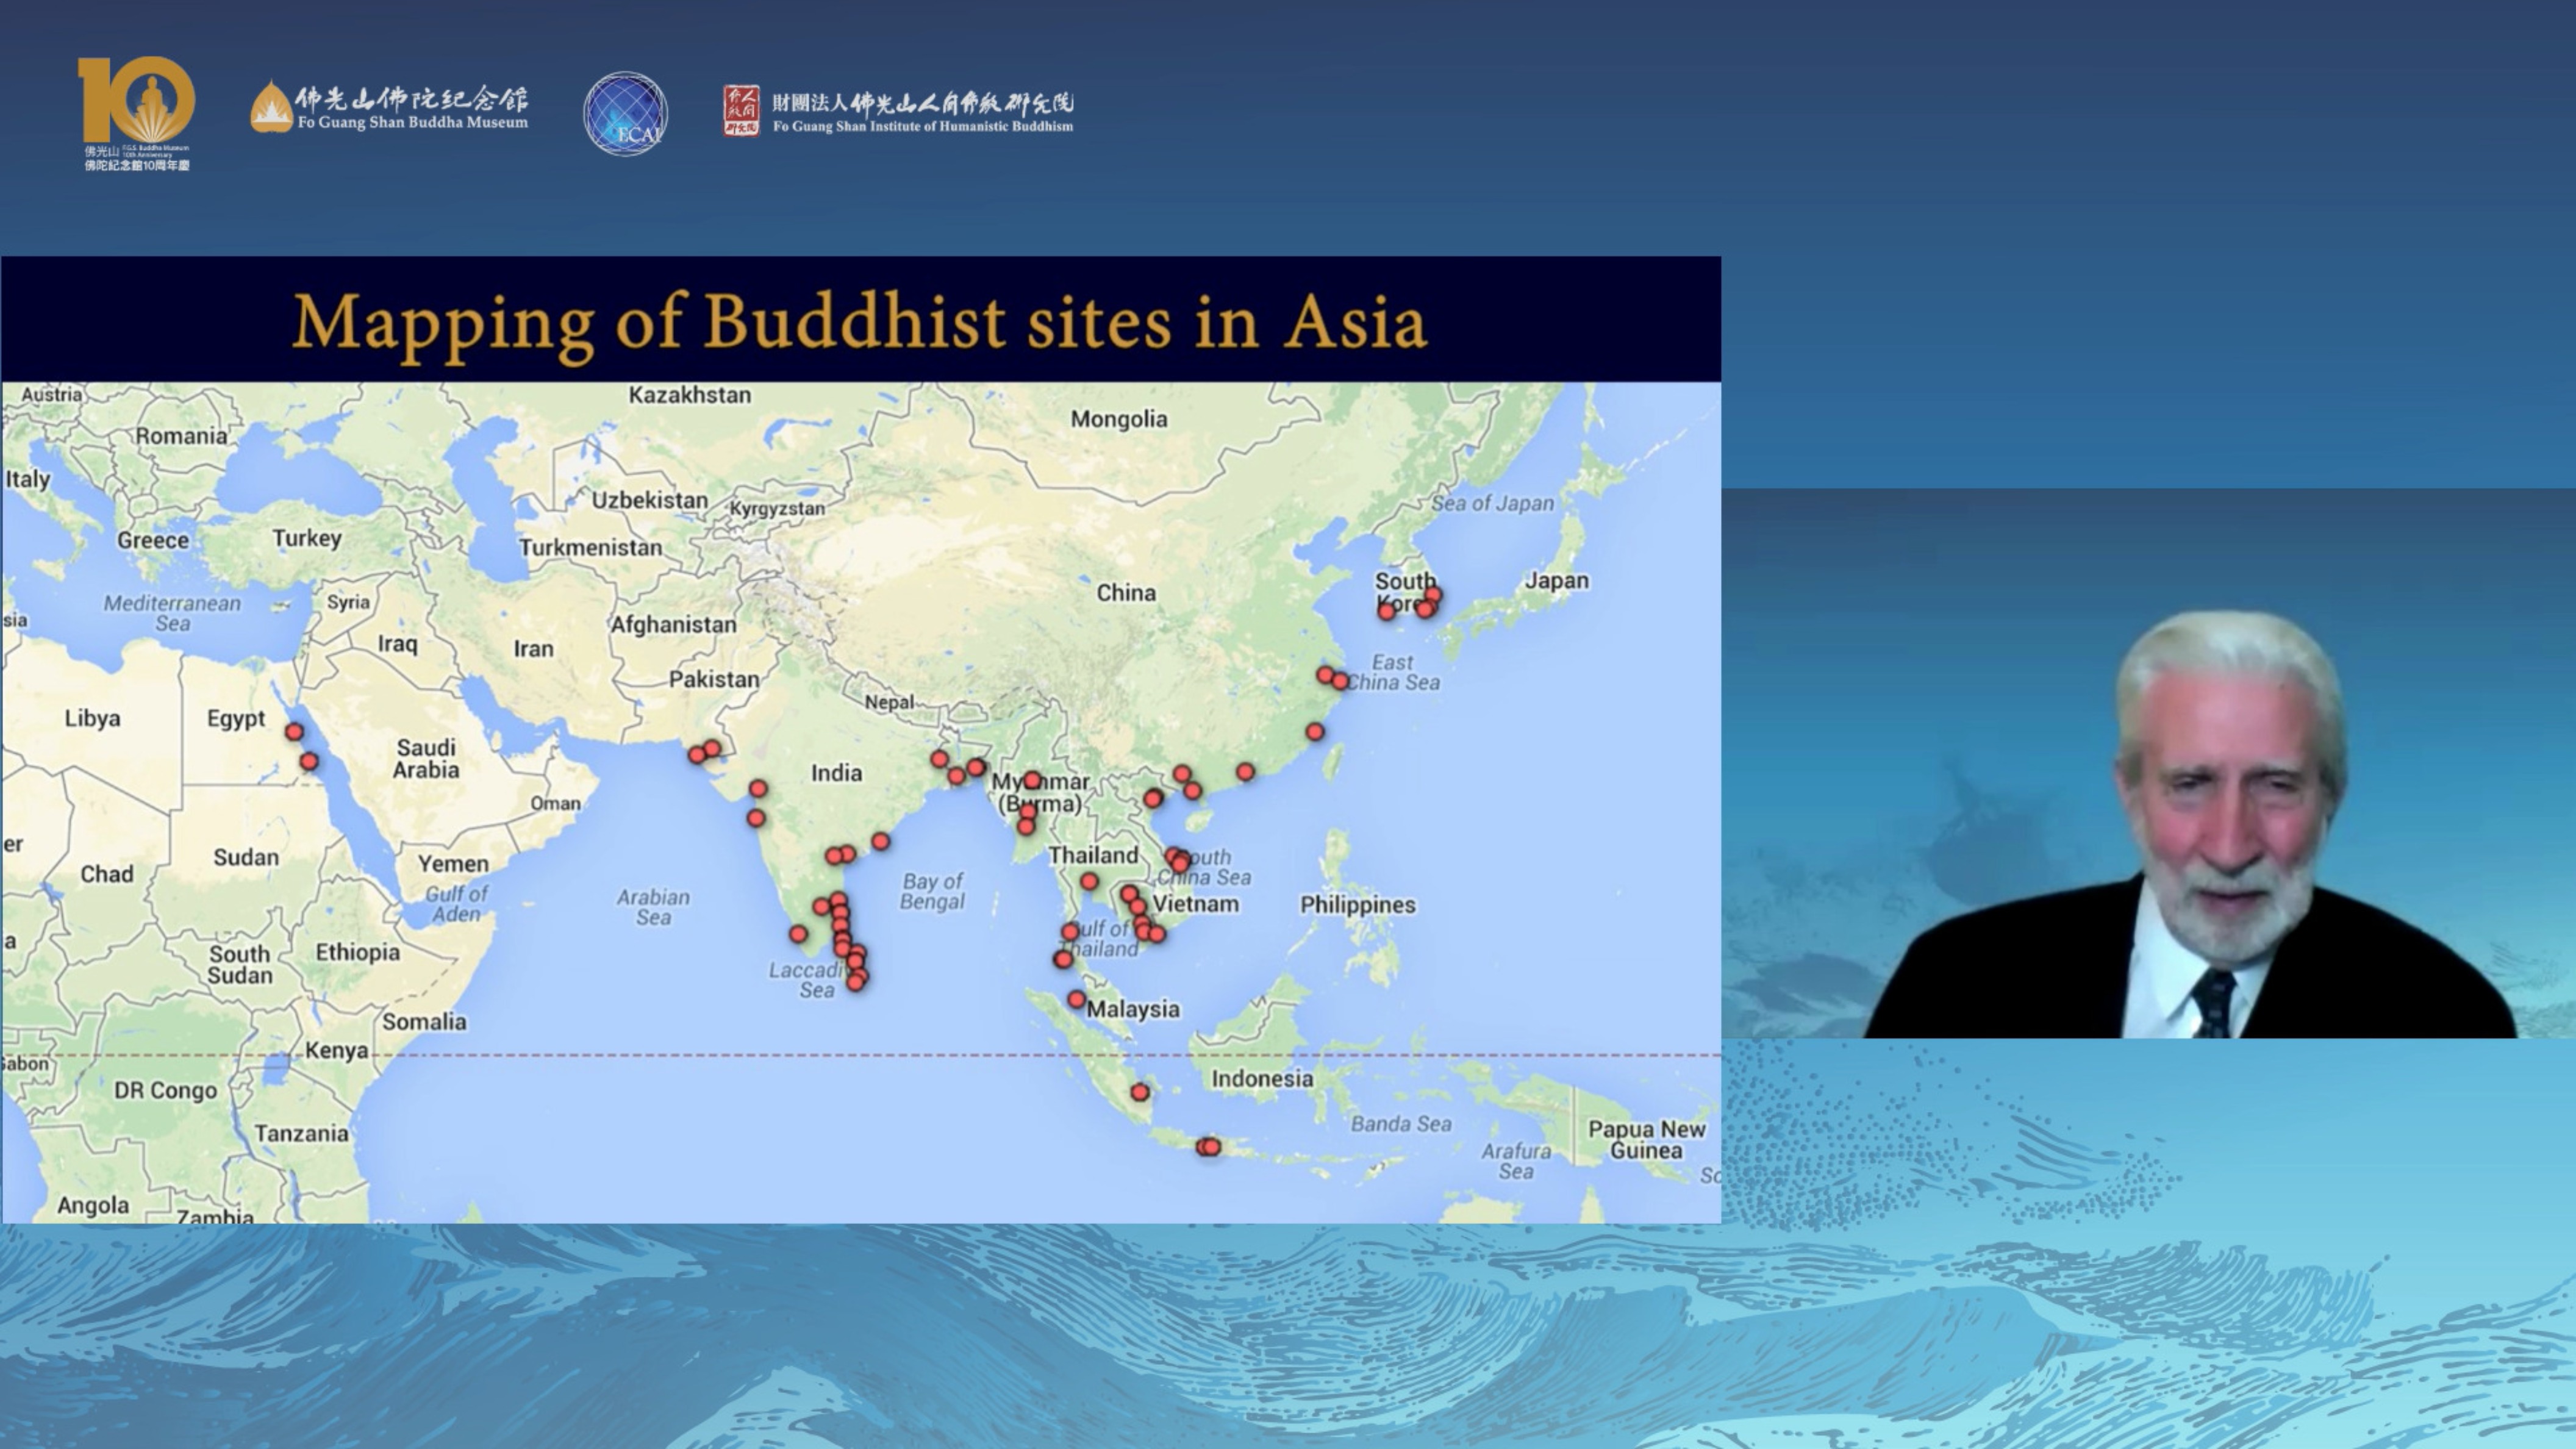 The Archaeological Institute of India fieldwork teams and the Atlas of Maritime Buddhism project staff used GPS tools to map the precise location of Buddhist sites across Asia, clearly showing Buddhist artifacts clustering along the coasts.